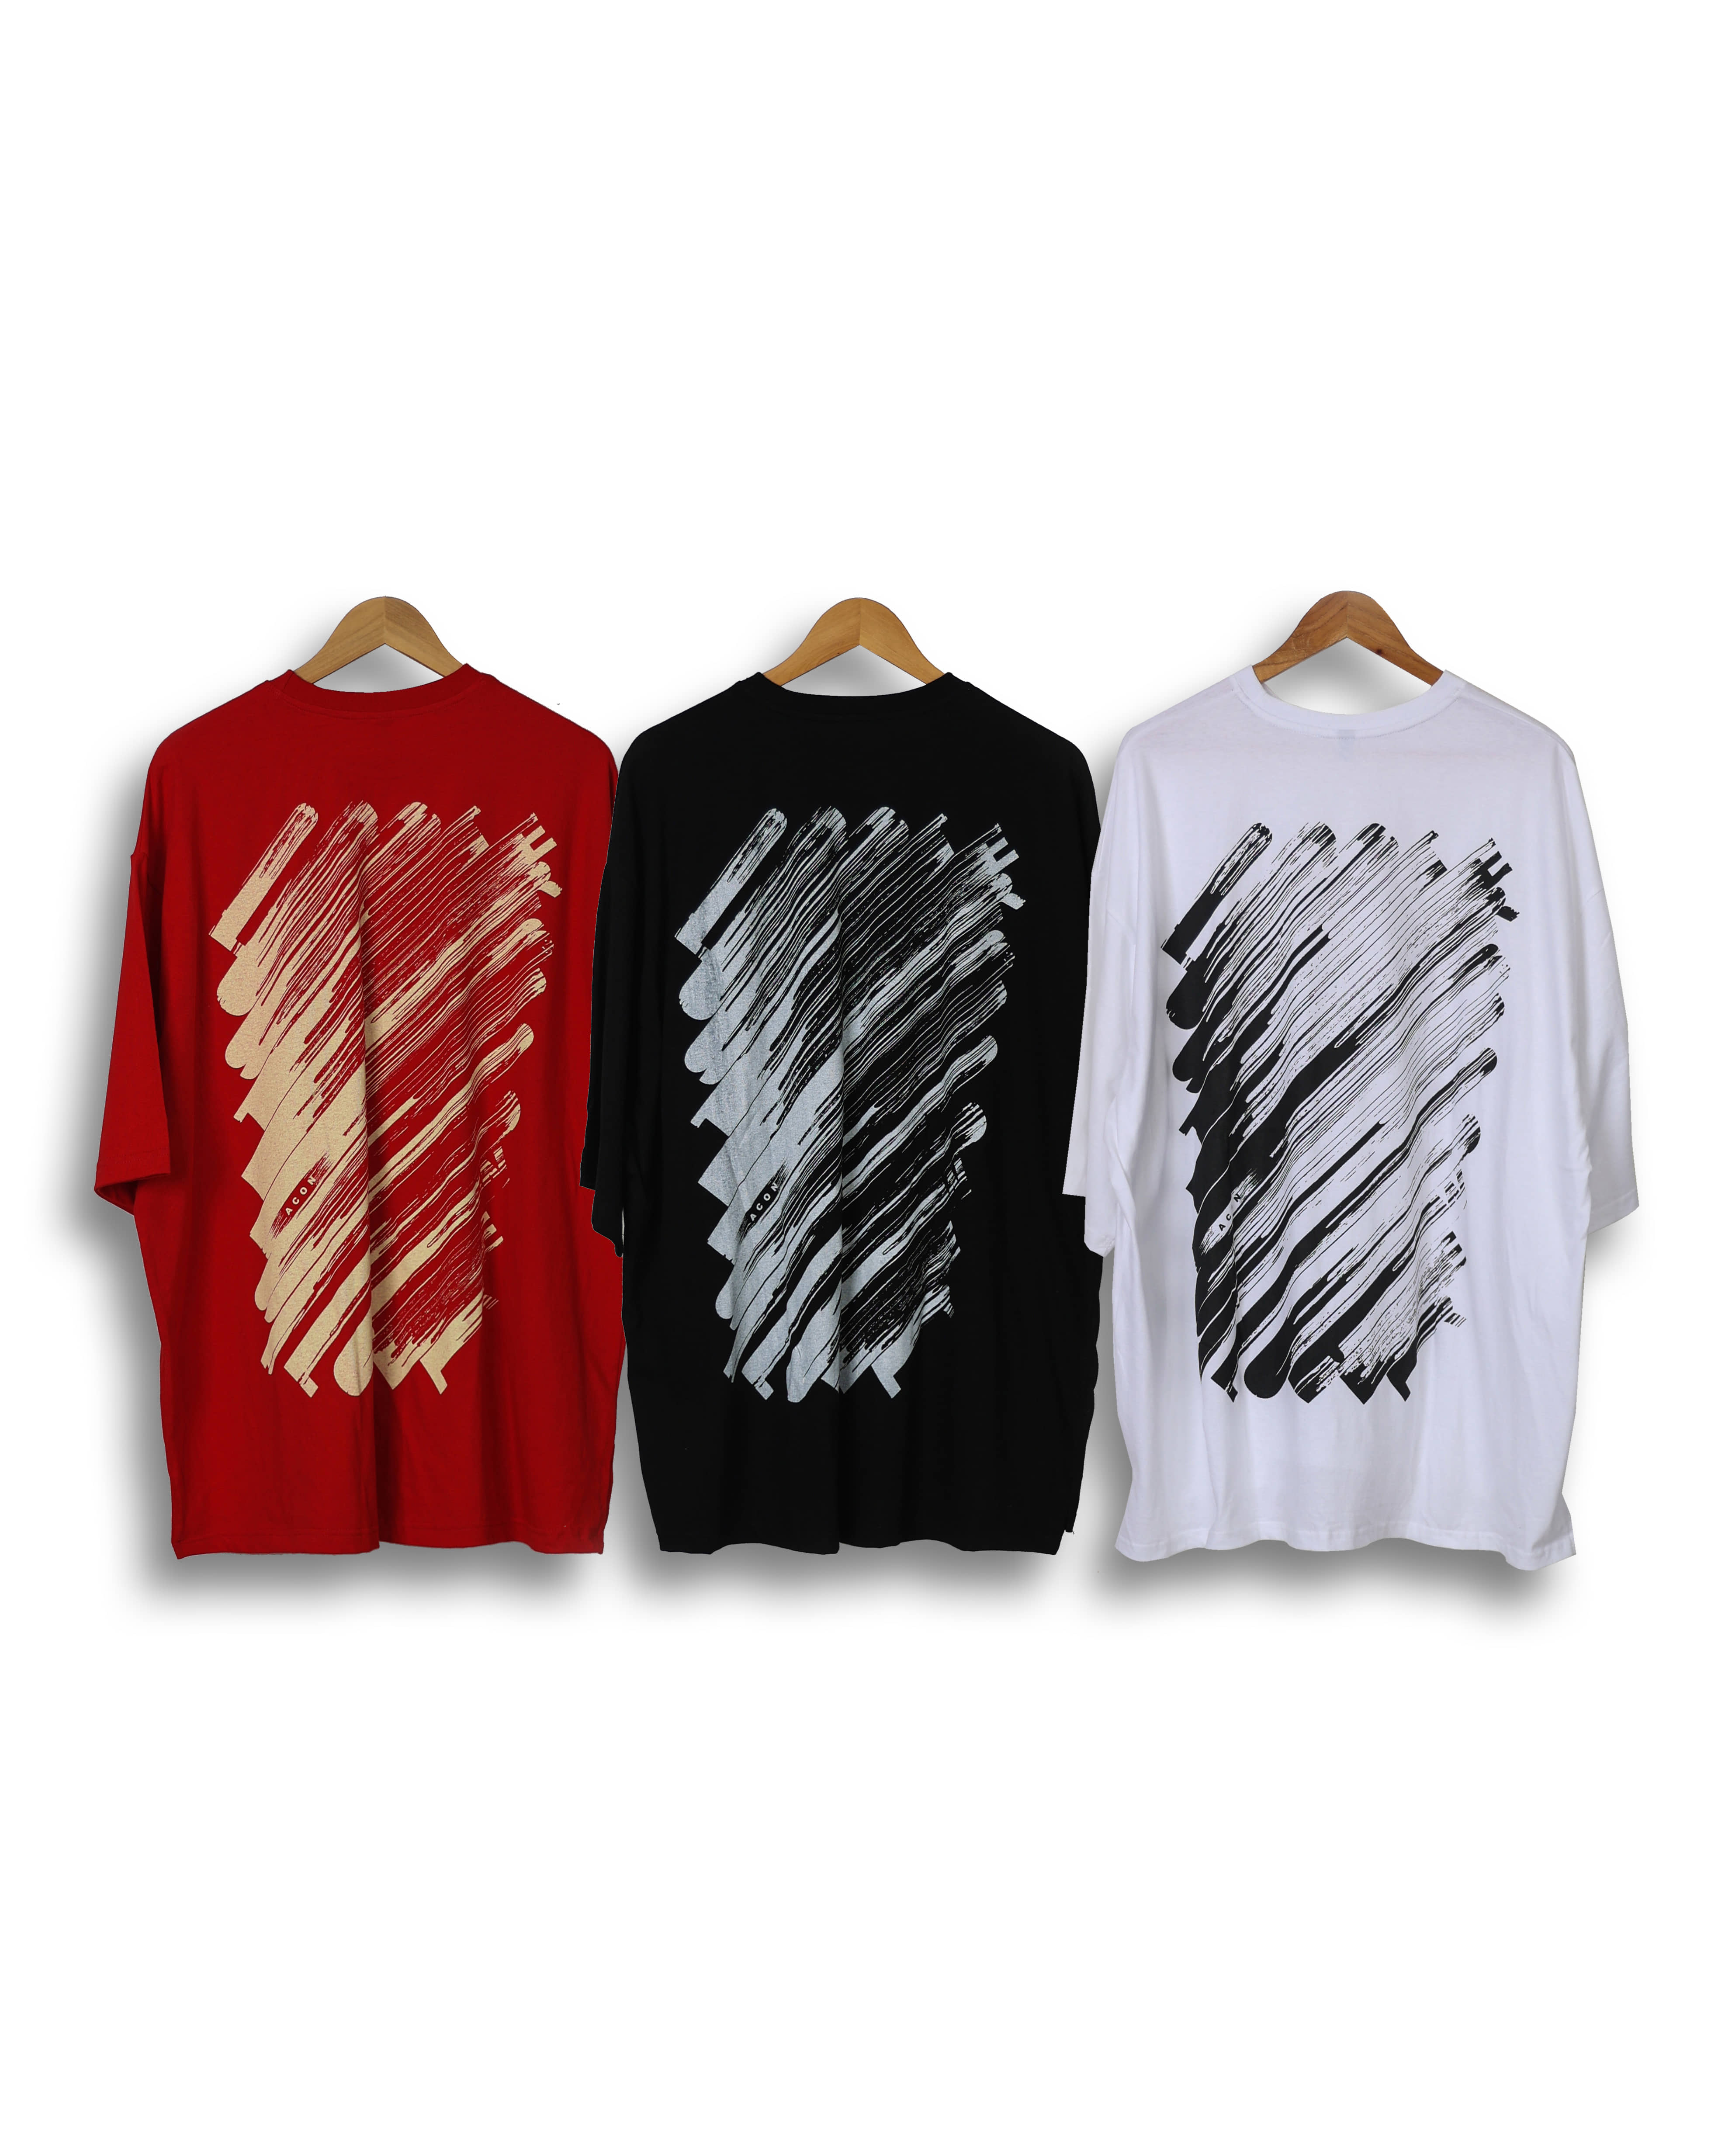 Scratch Oversize T-Shirts (Black/White/Red)